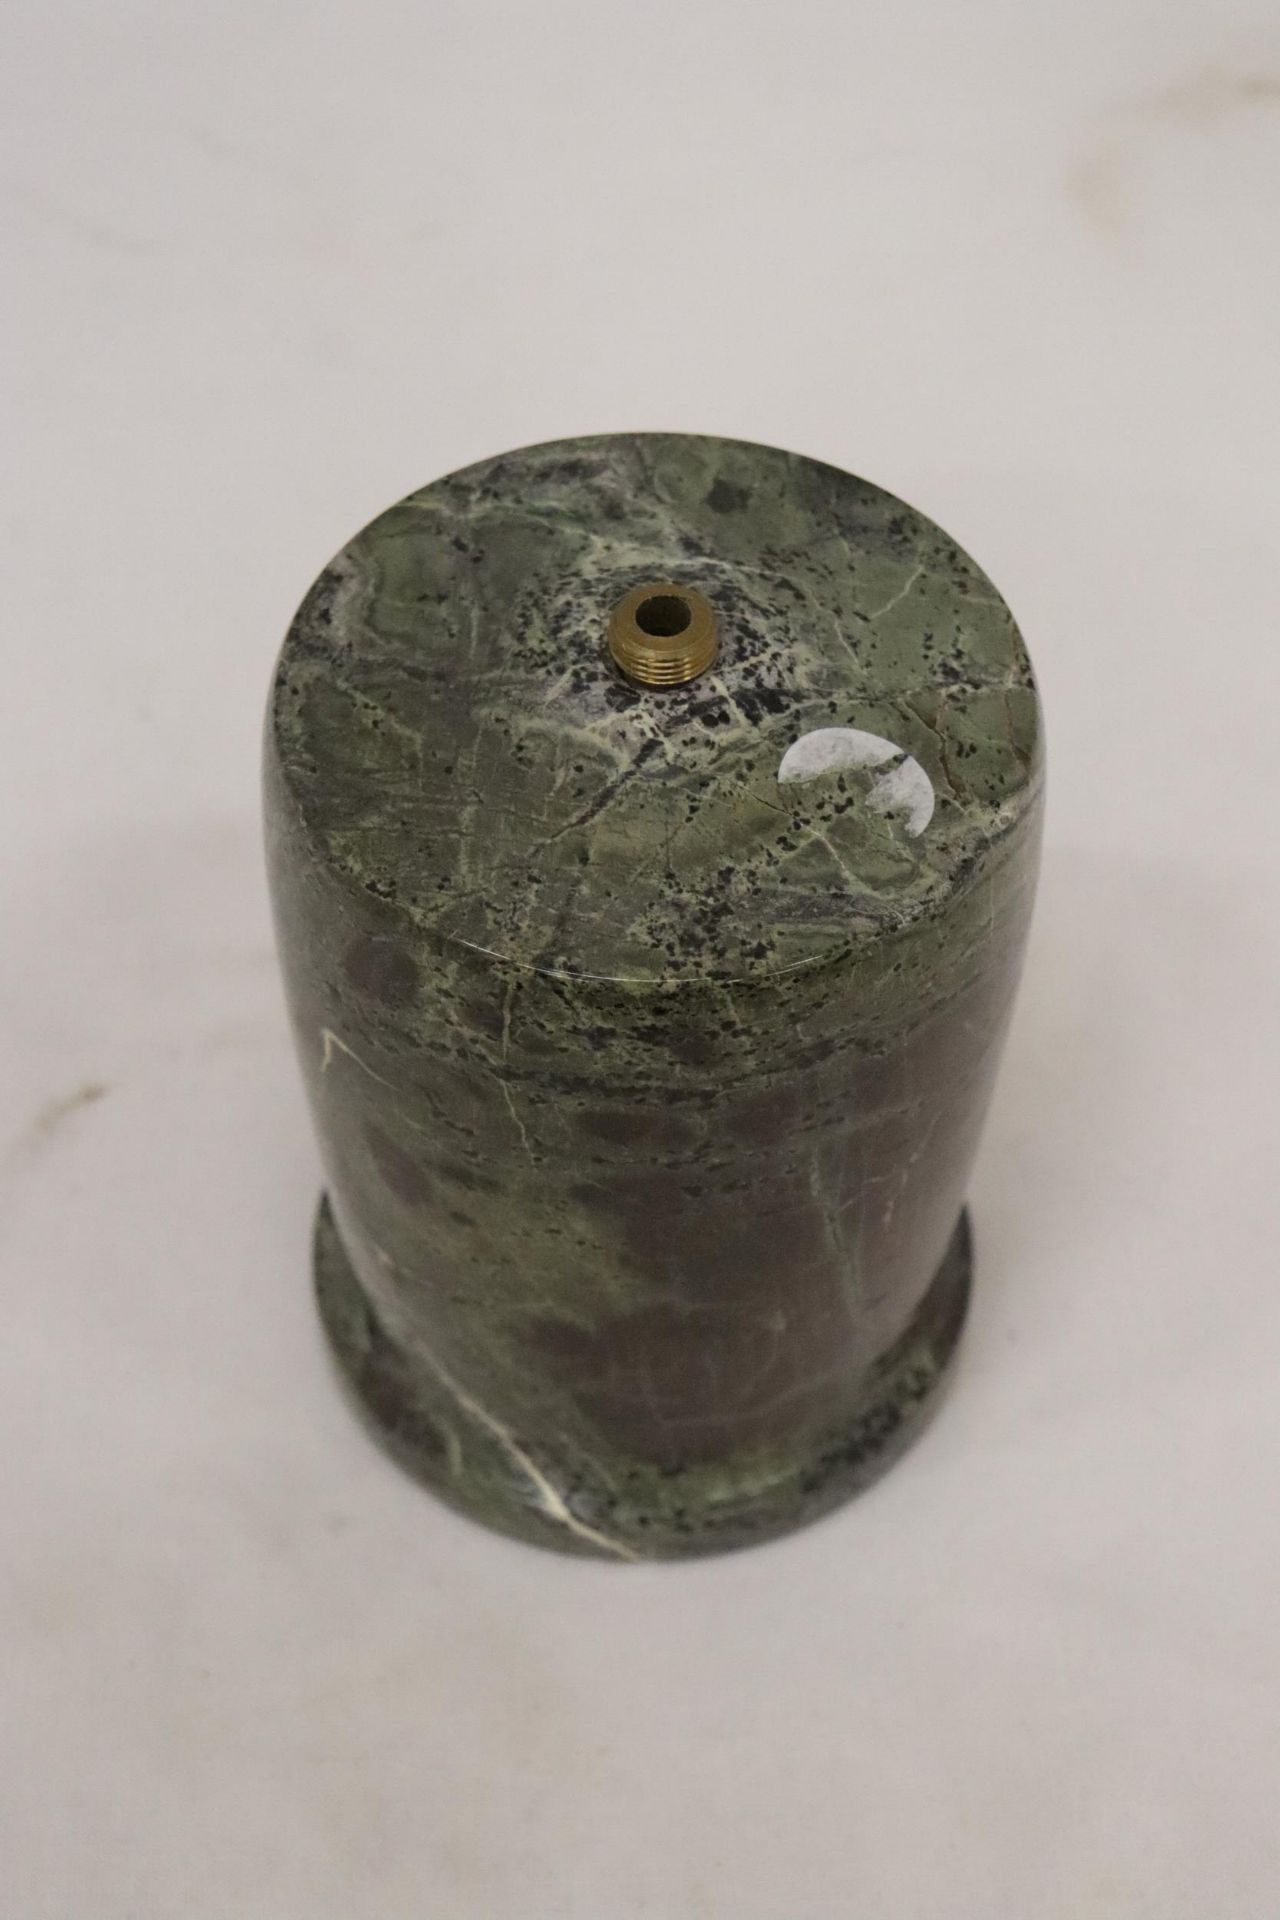 A HEAVY STONE LAMP BASE, BELIEVED TO BE MADE FROM CORNISH SERPENTINE FROM THE LIZARD PENINSULA. - Image 2 of 4